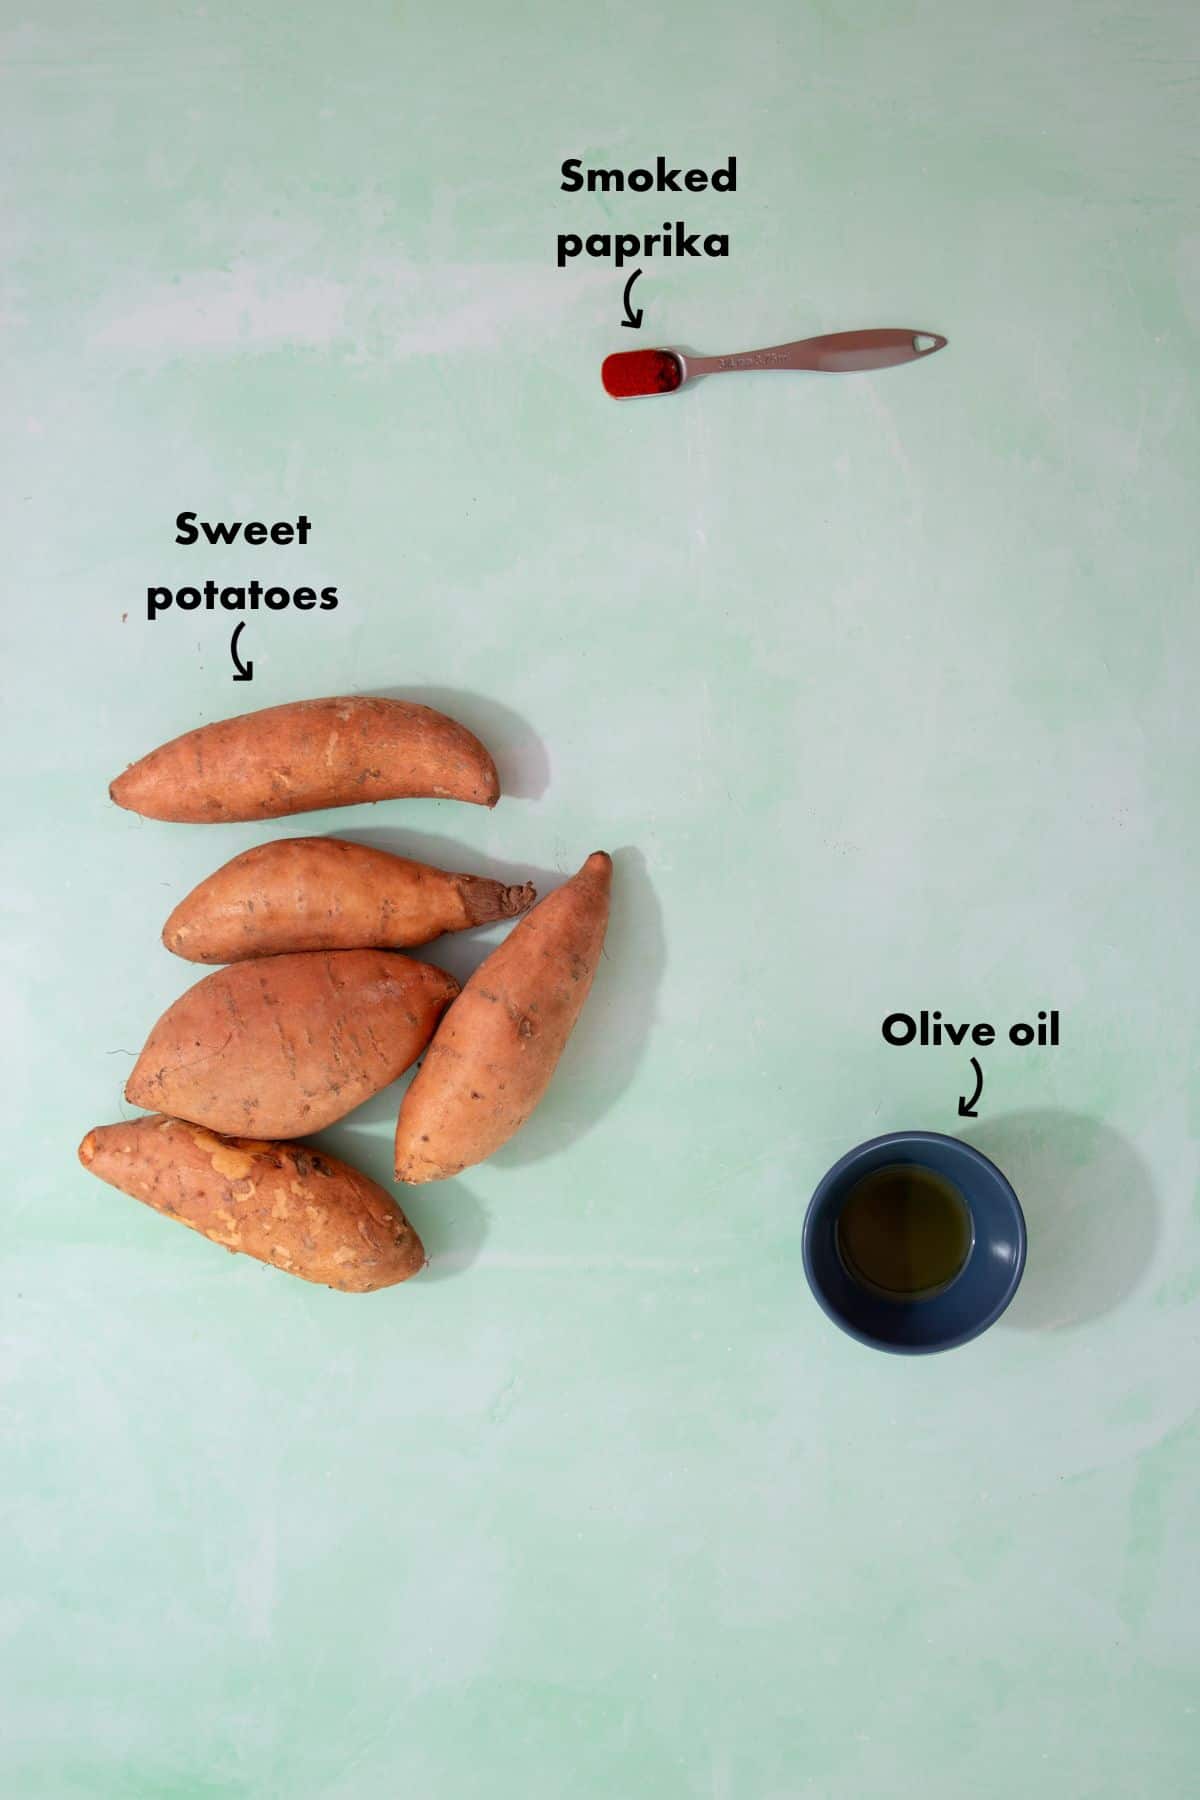 Ingredients to make the sweet ptoato recipe laid out on a plae blue background and labelled.
